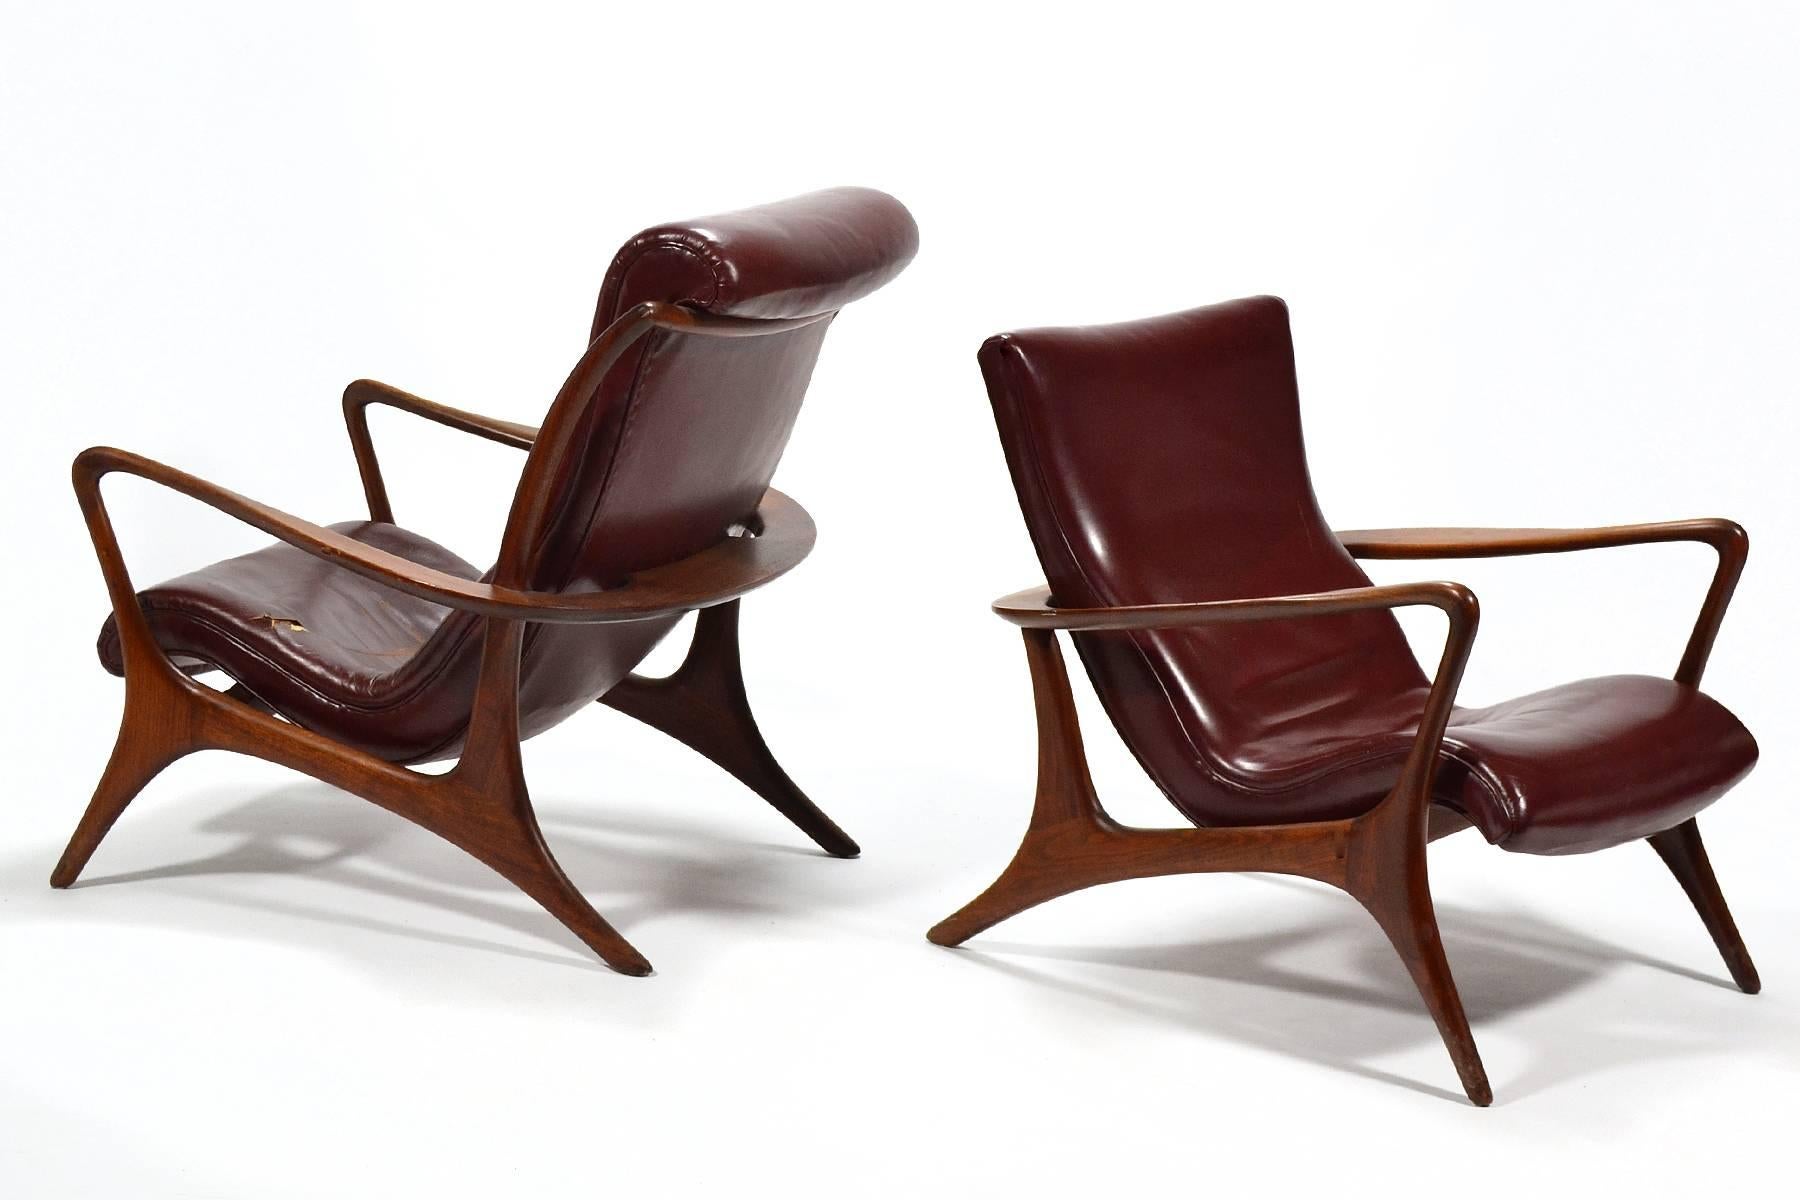 We are delighted to offer these exceptional lounge chairs by Vladimir Kagan. The 